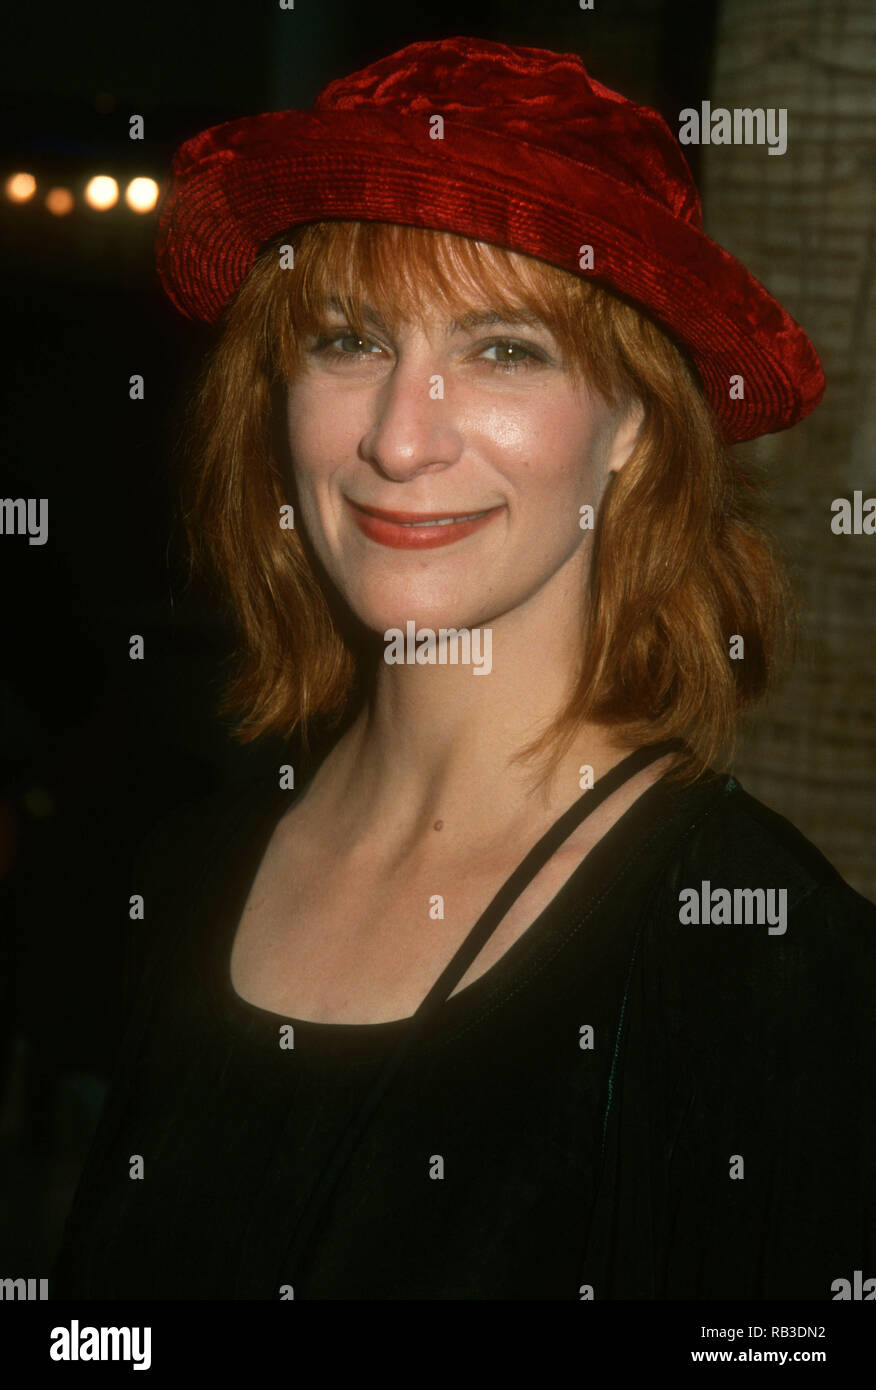 HOLLYWOOD, CA - JULY 28: Actress Amanda Plummer attends TriStar Pictures' 'So I Married An Axe Murderer' Premiere on July 28, 1993 at the Galaxy Theater in Hollywood, California. Photo by Barry King/Alamy Stock Photo Stock Photo